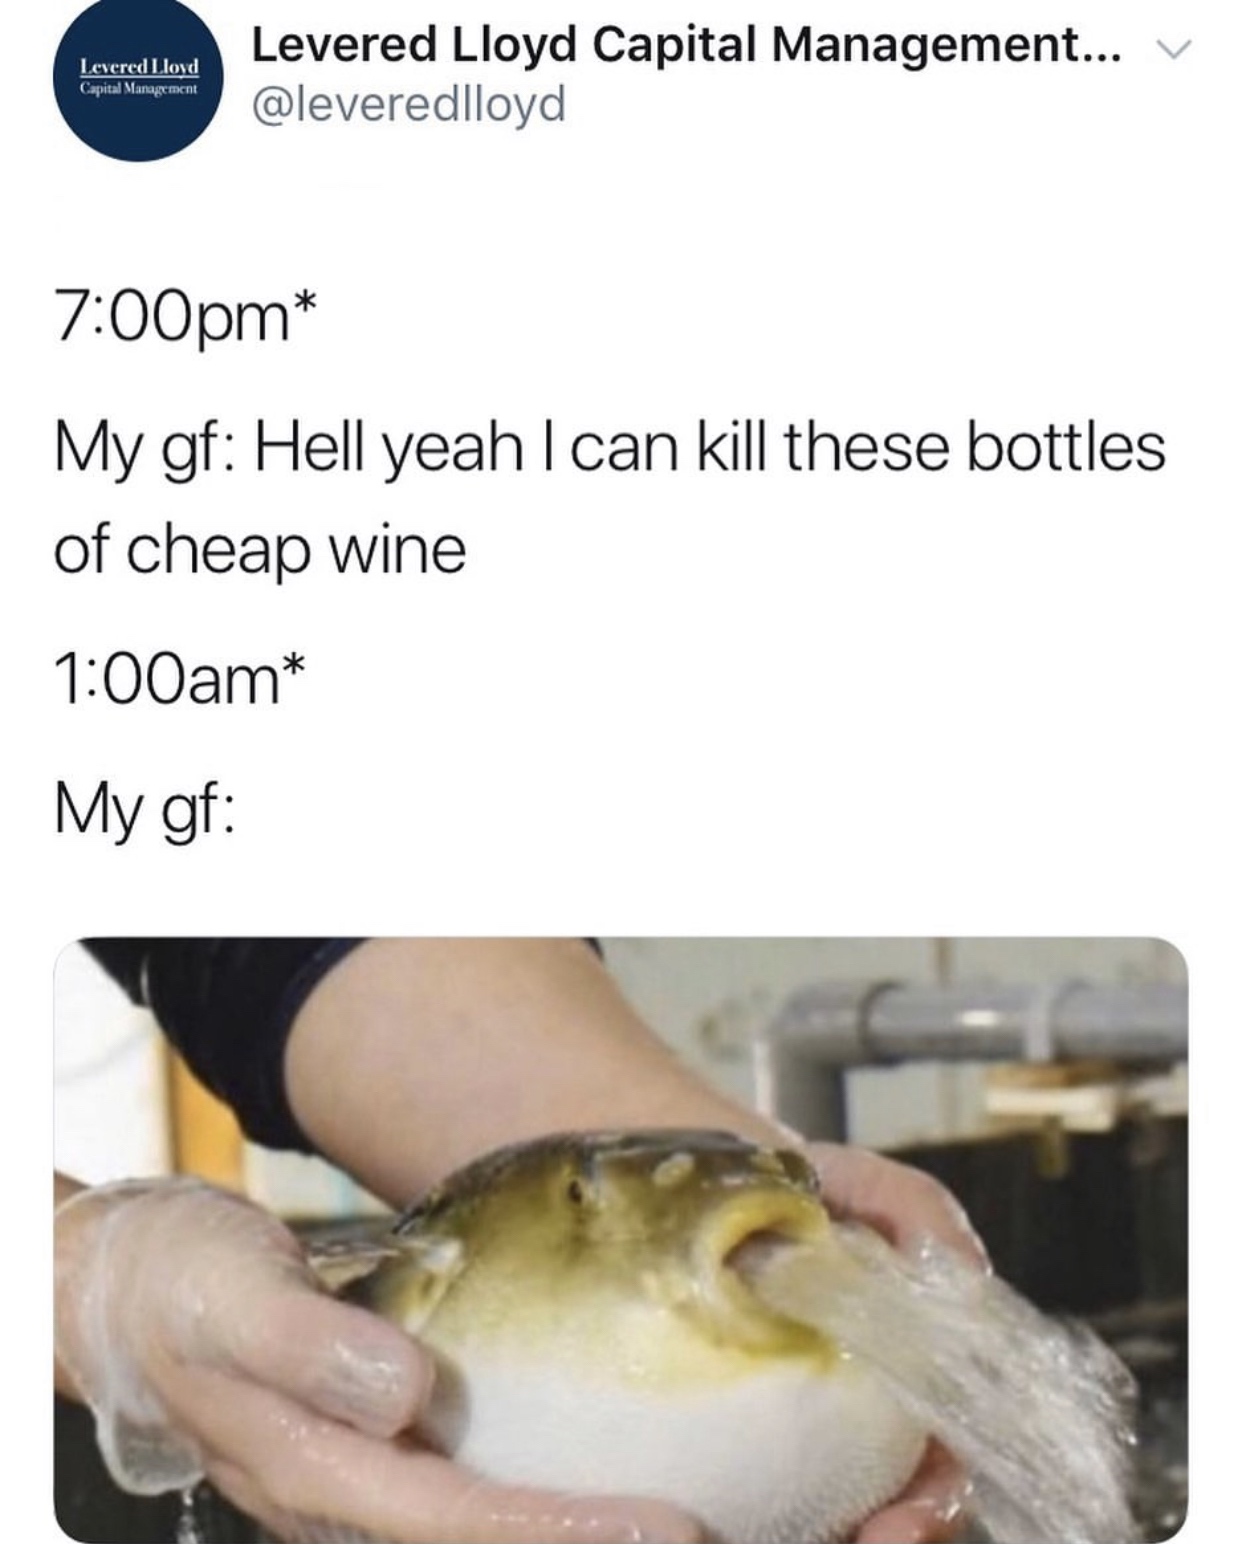 pufferfish greentext - Levered Lloyd Capital Management Levered Lloyd Capital Management... V pm My gf Hell yeah I can kill these bottles of cheap wine am My gf